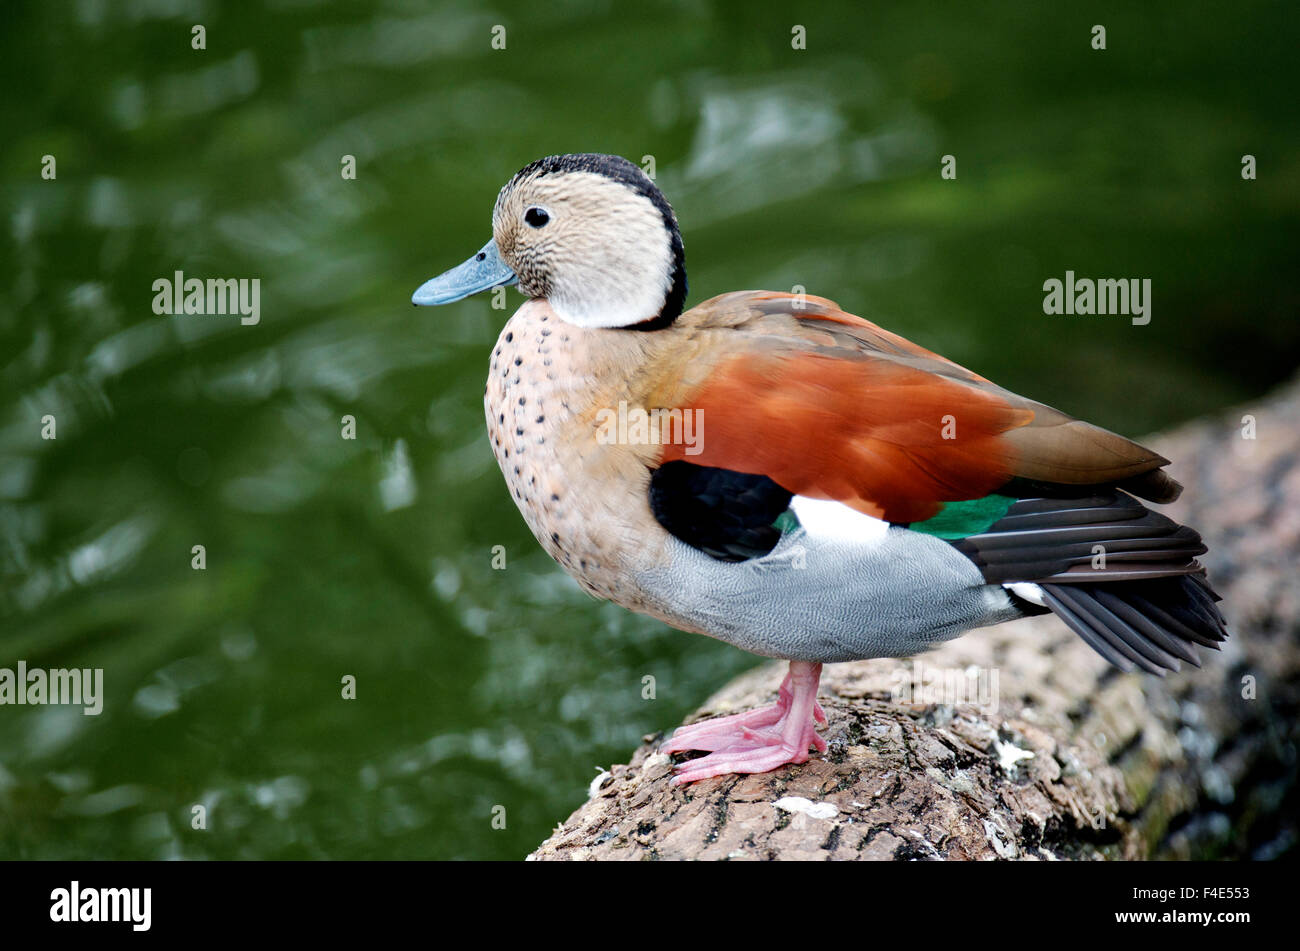 A Blue-billed duck in Kowloon Park. The Ringed Teal (Callonetta leucophrys) is a small duck of South American forests. It is the only species of the genus Callonetta. It is captive in Kowloon Park, Hong Kong Stock Photo